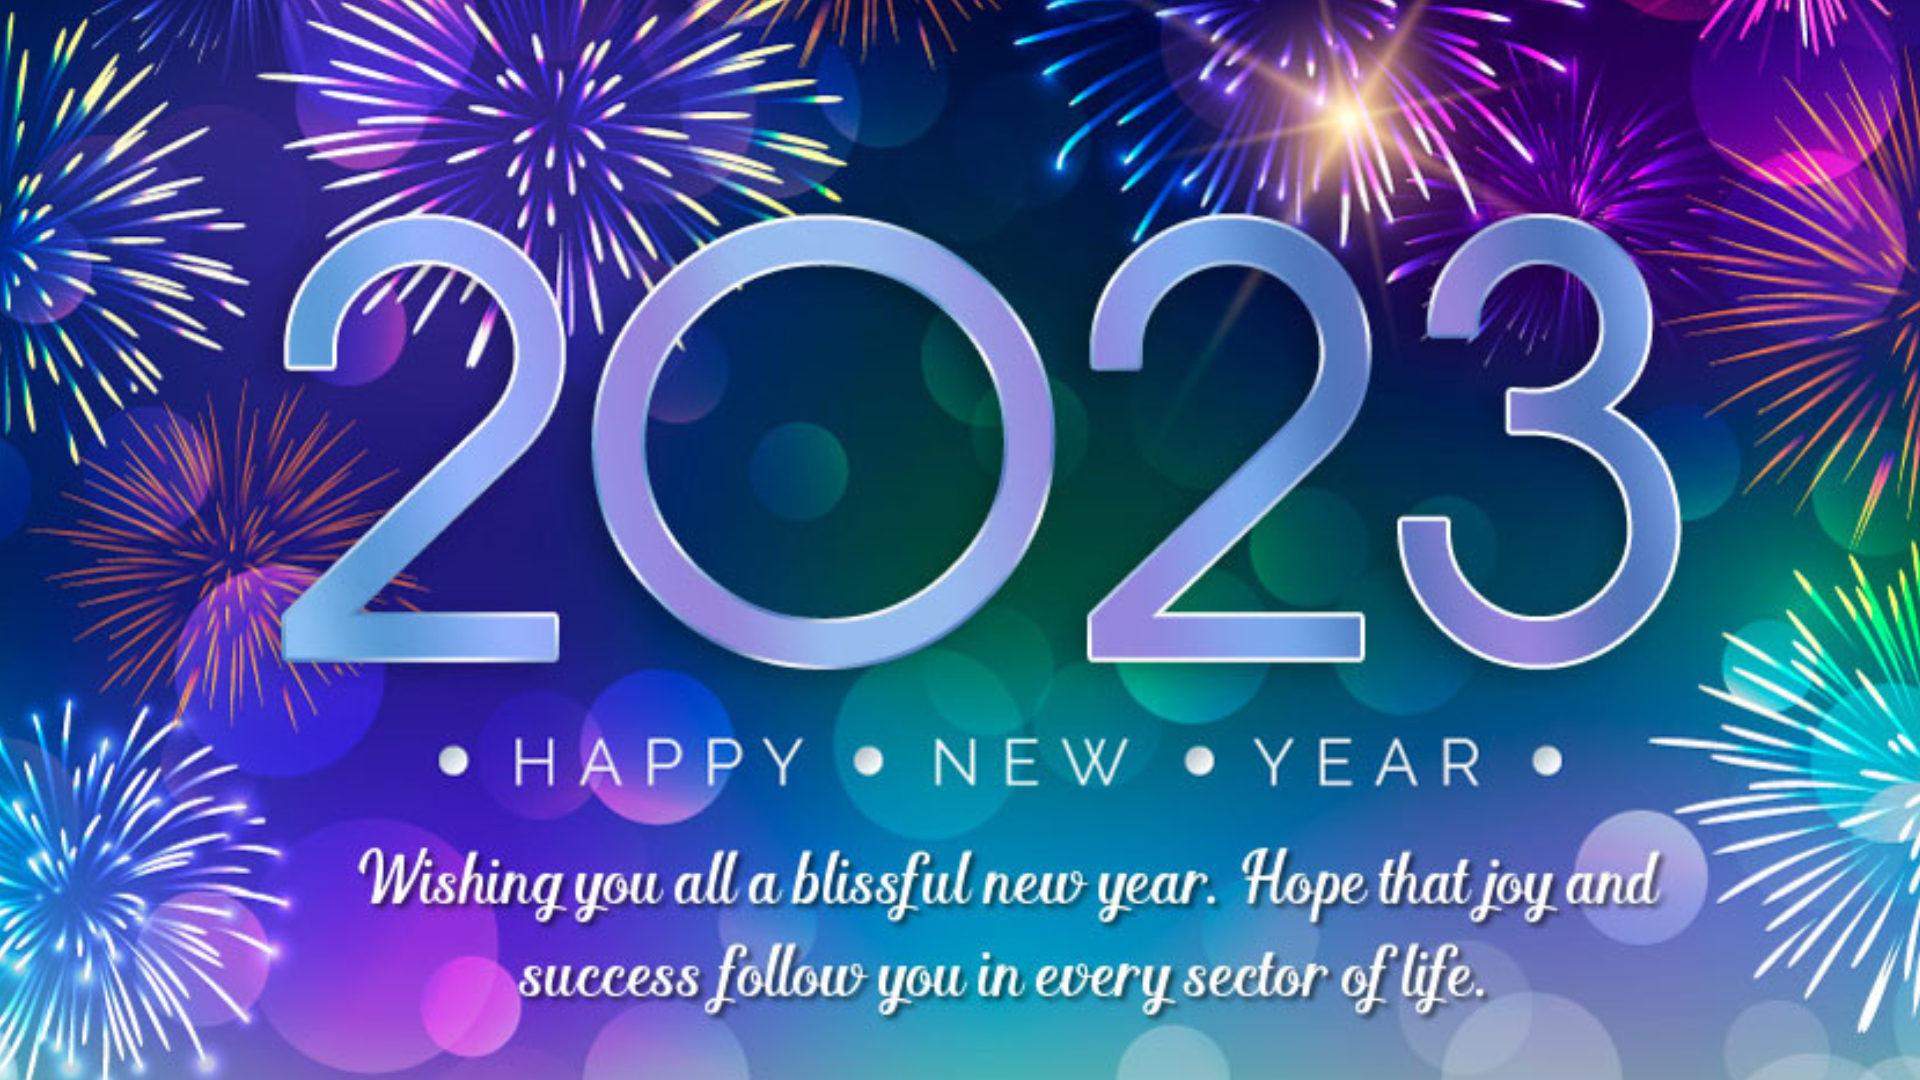 happy new year wallpaper wishes